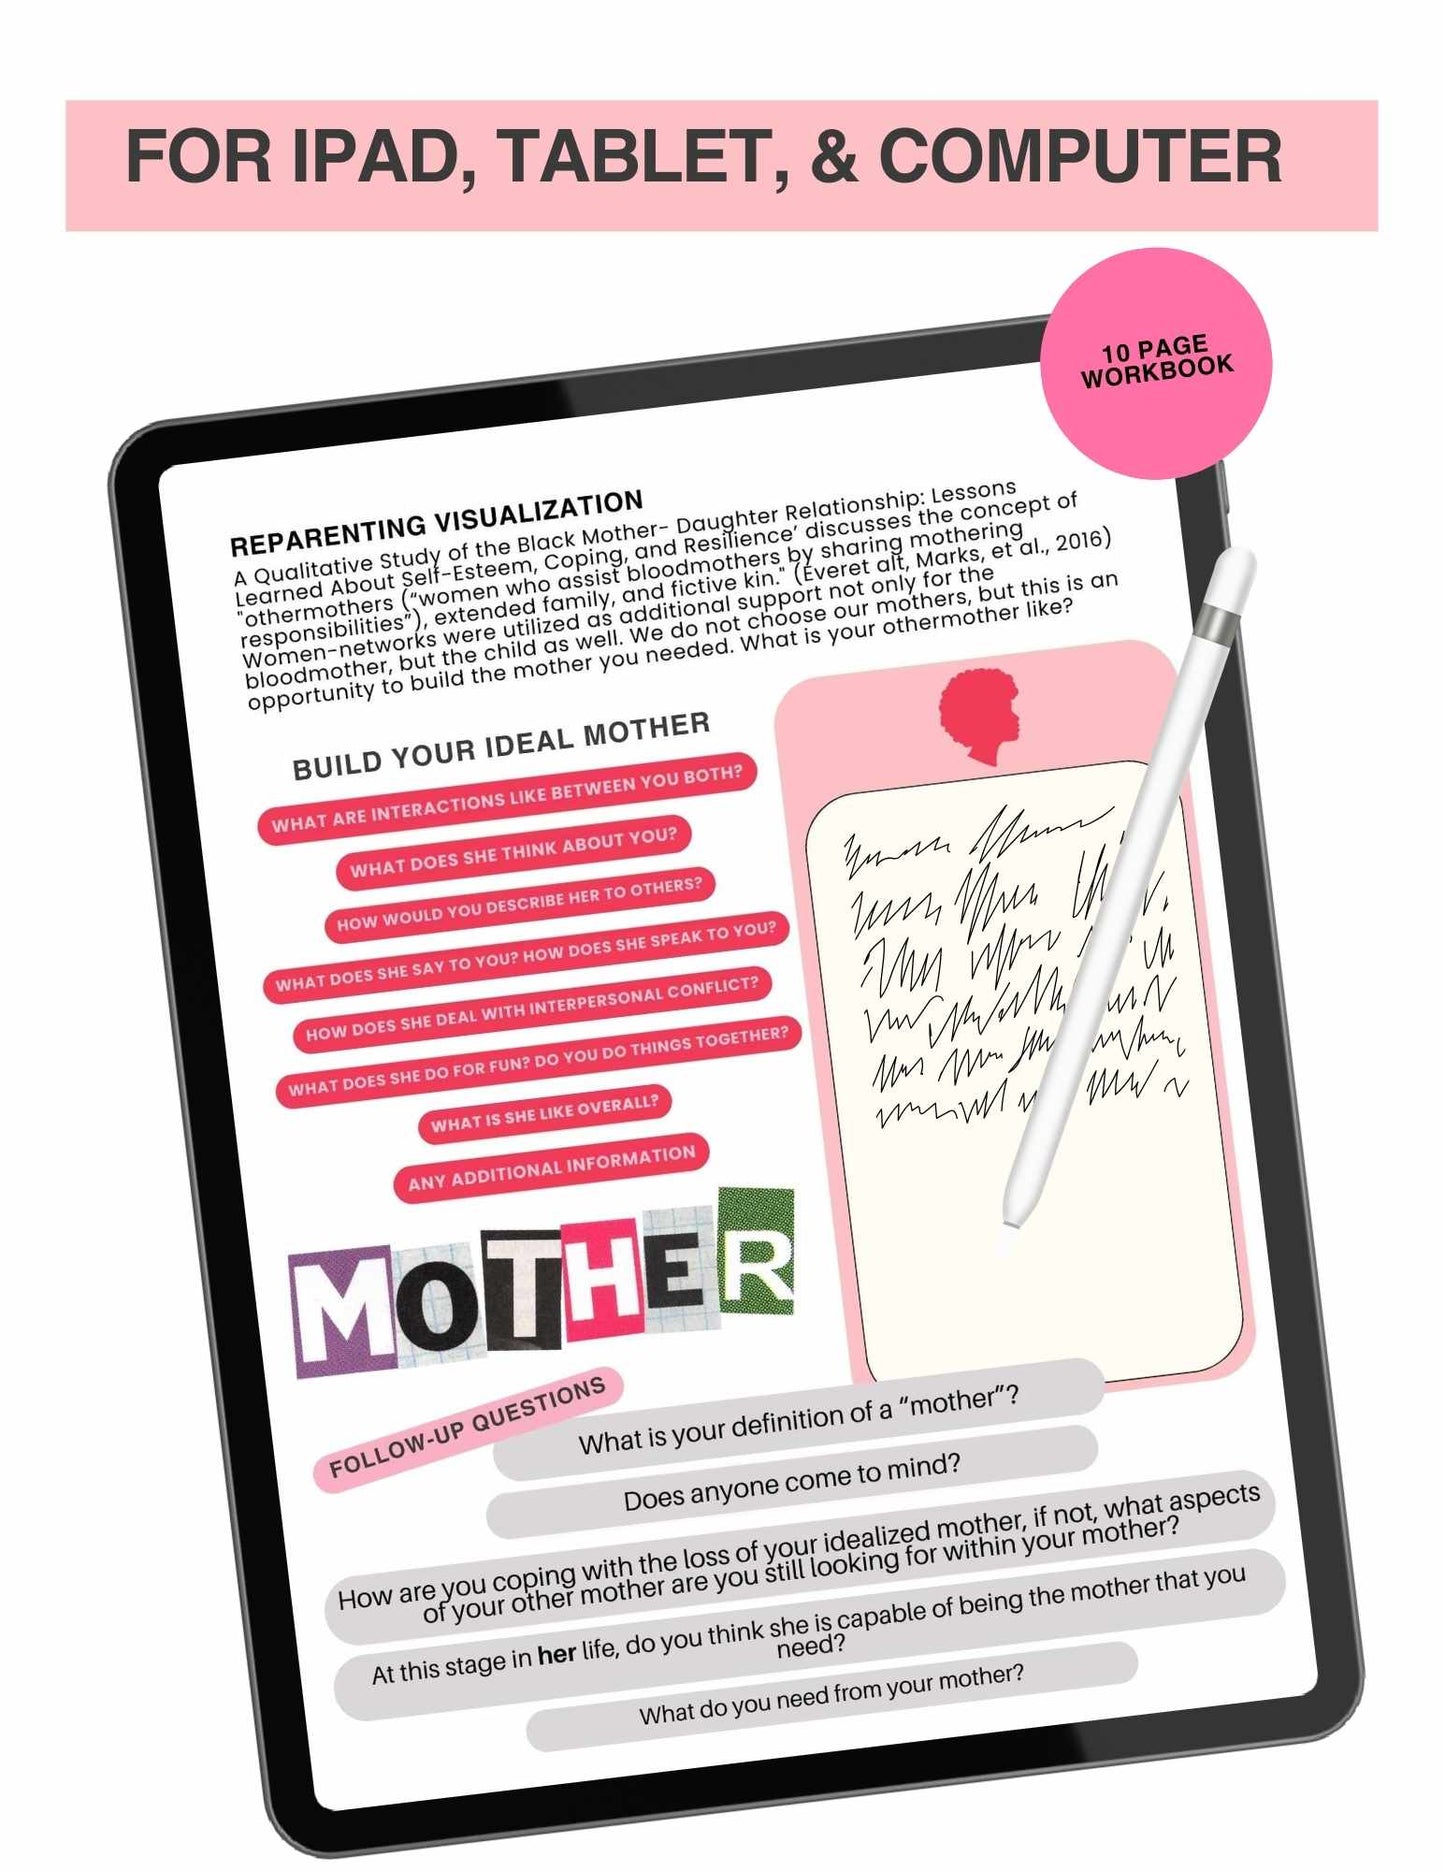 'Where is Your Mother...' The Complete Mother-Daughter Workbook to Heal Your Inner Child